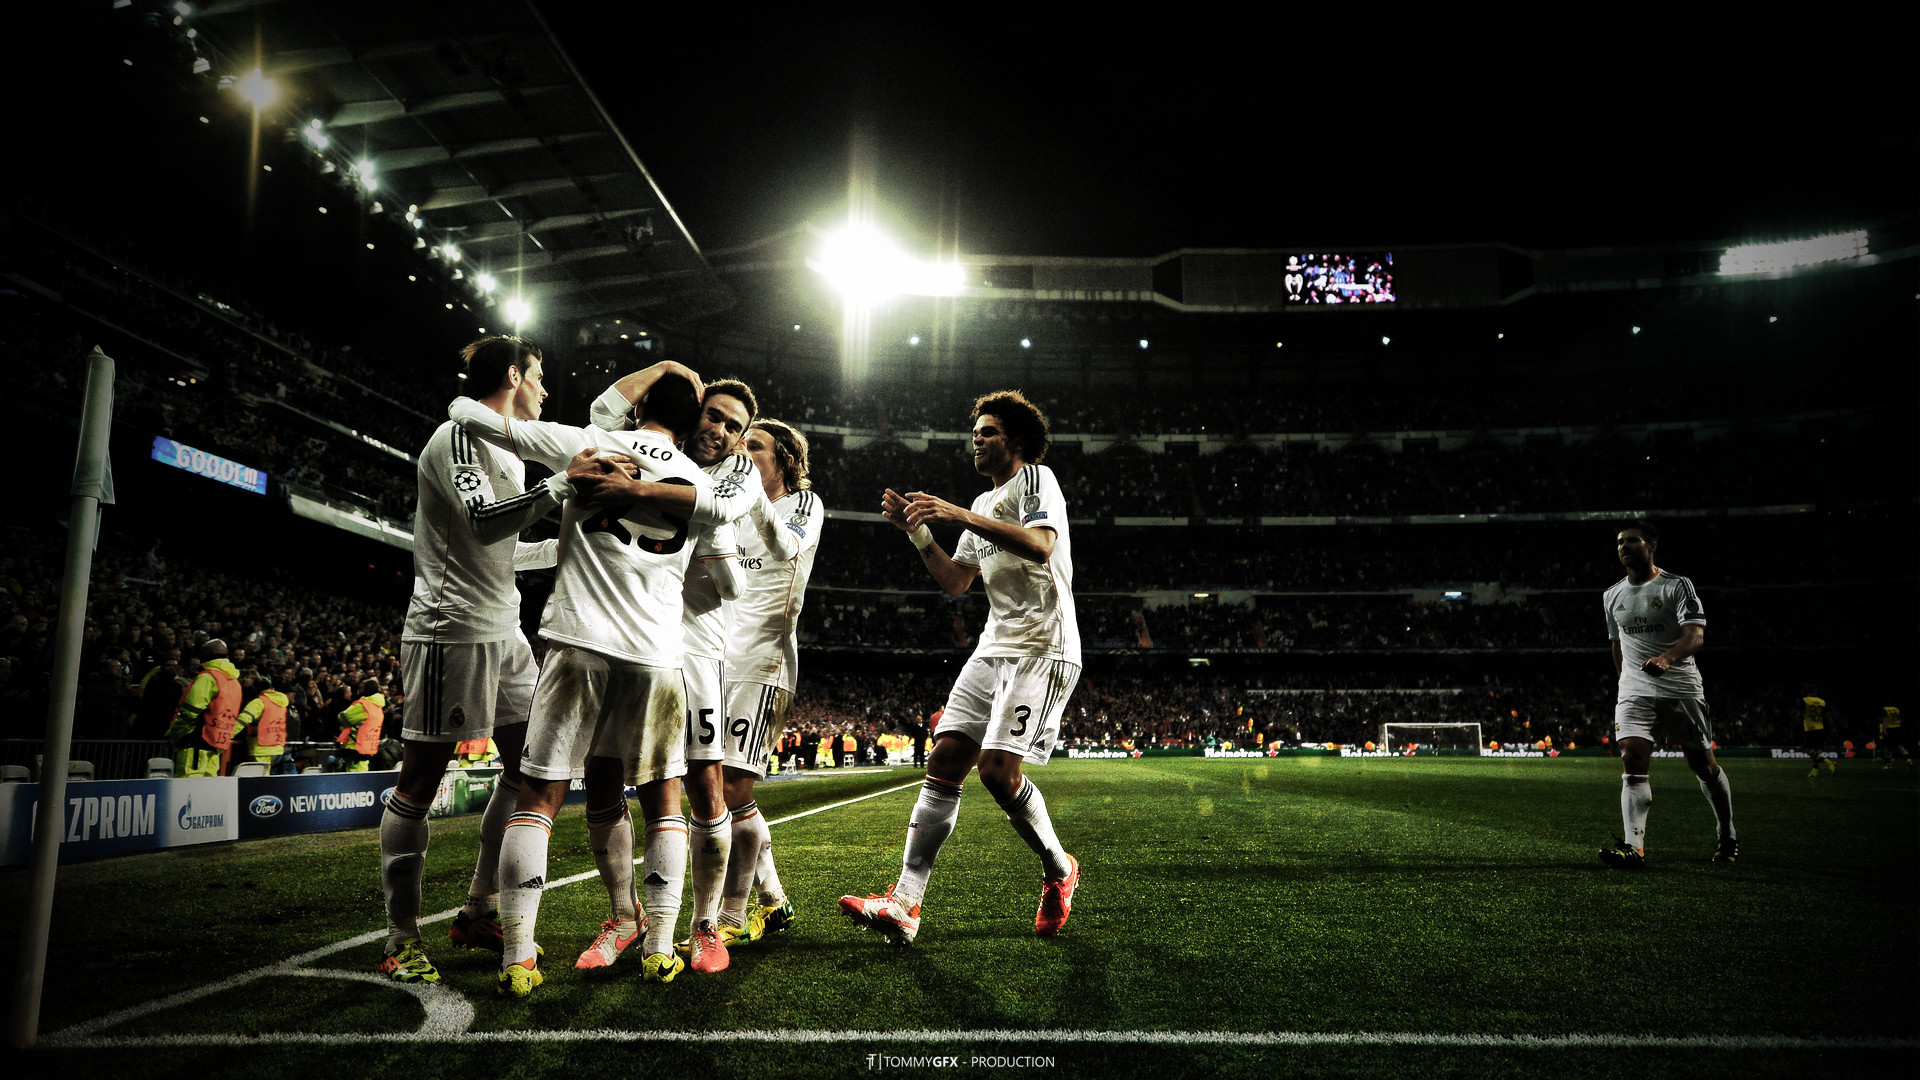 1920x1080 Real Madrid - We're all white